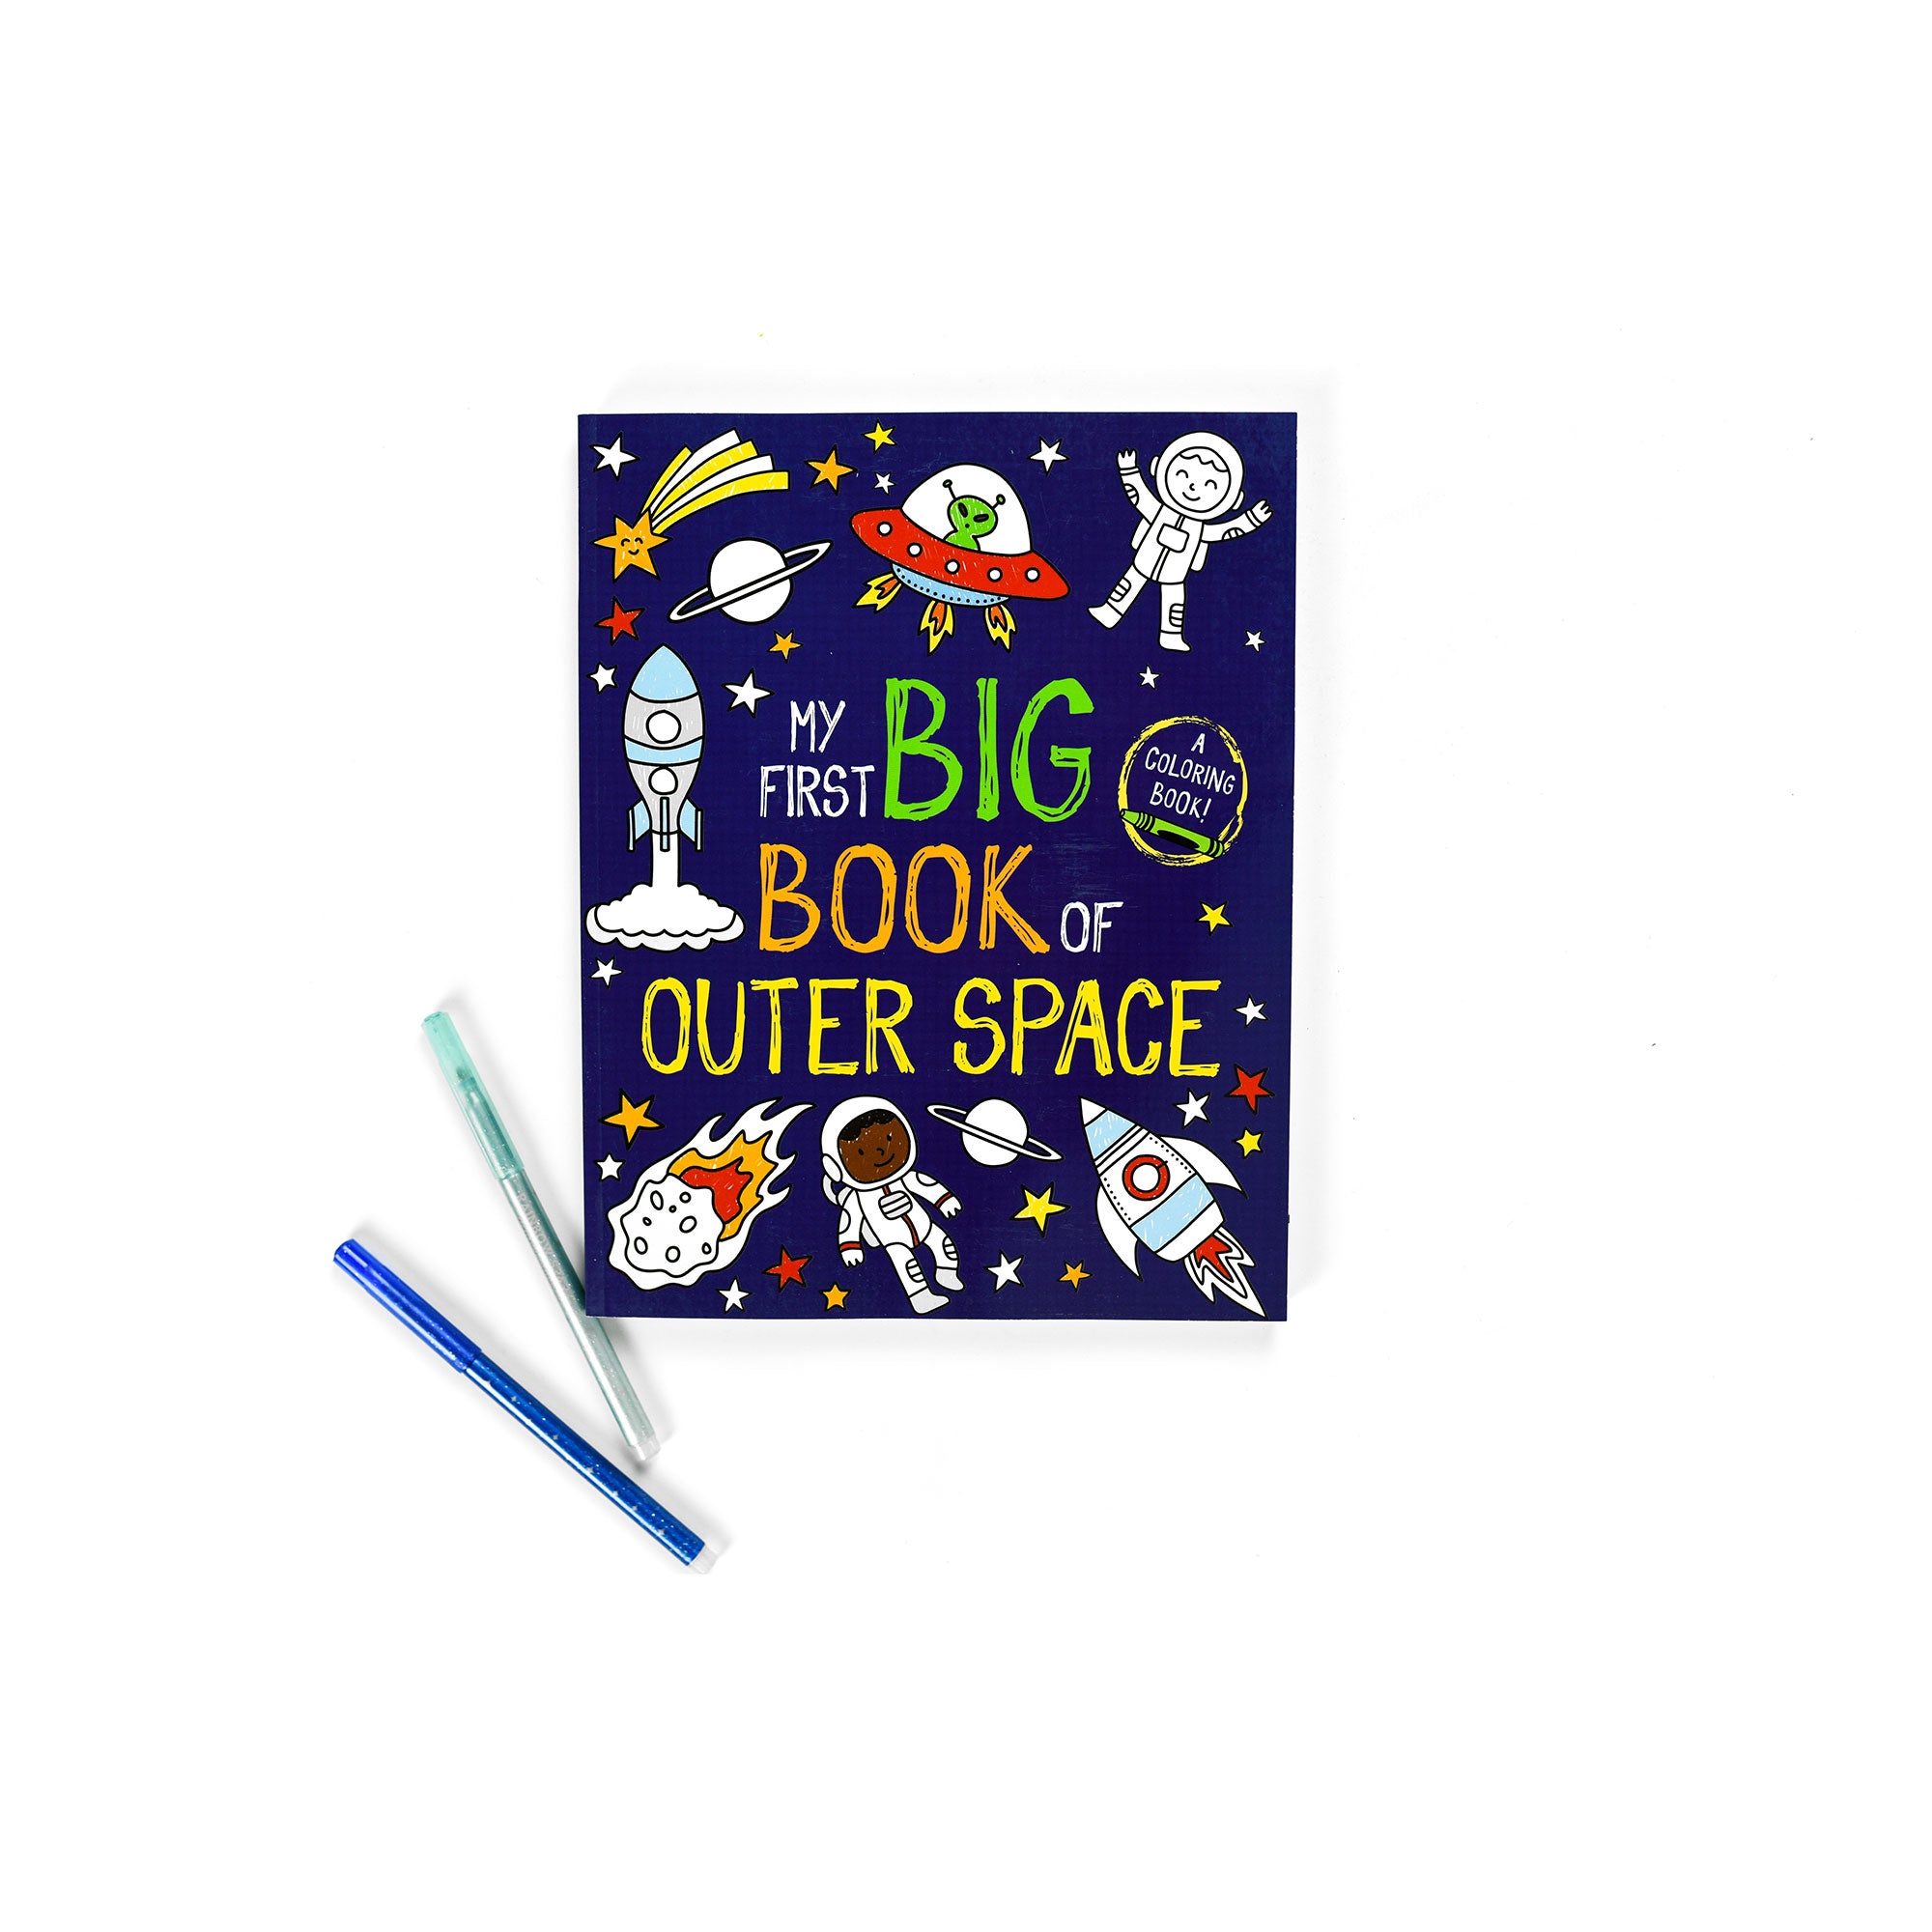 Book　Book　Bicycle　Big　My　First　Space　–　of　Pie　Outer　Coloring